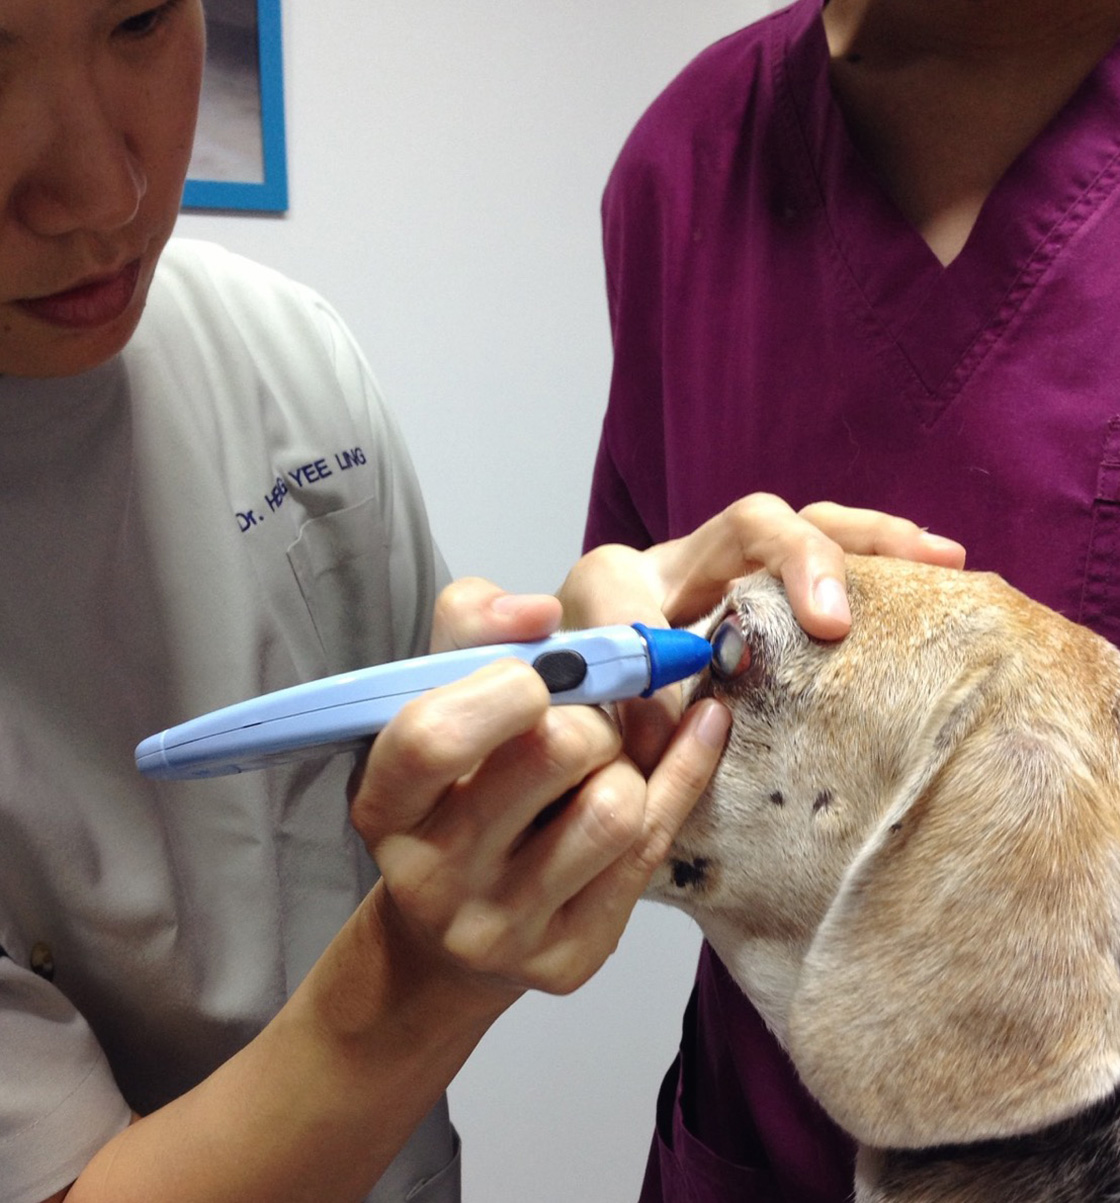 A veterinarian conducts an ophthalmic examination on a beagle using a handheld instrument to inspect the eye closely.